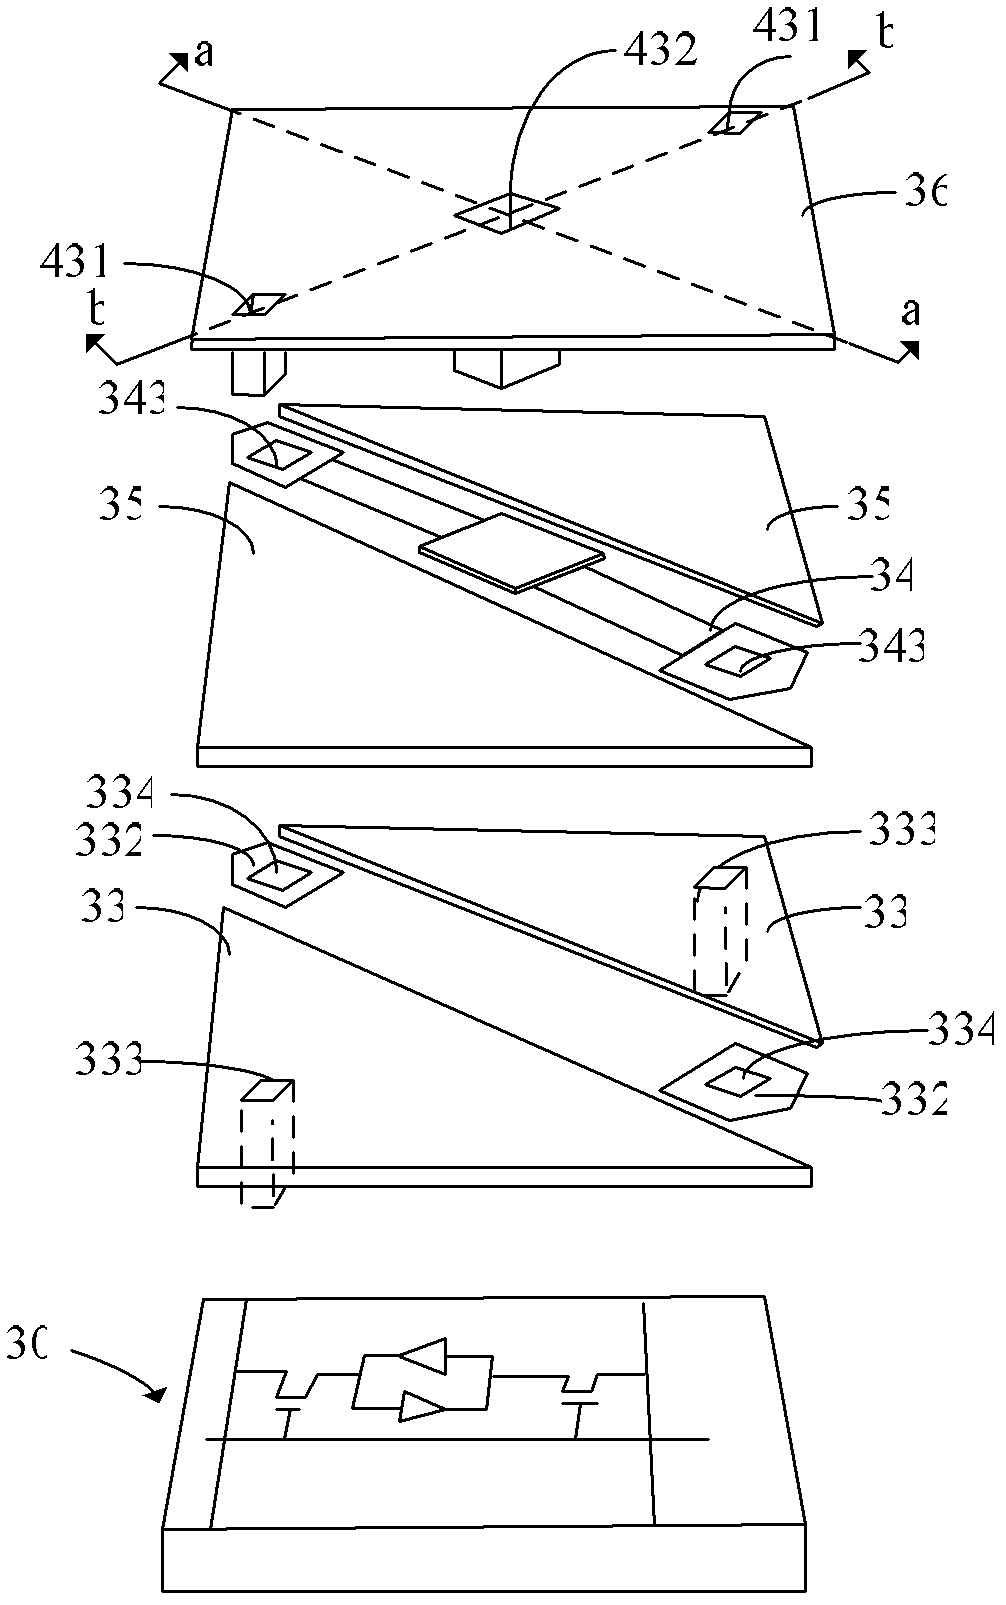 Digital micro-mirror device and forming method thereof